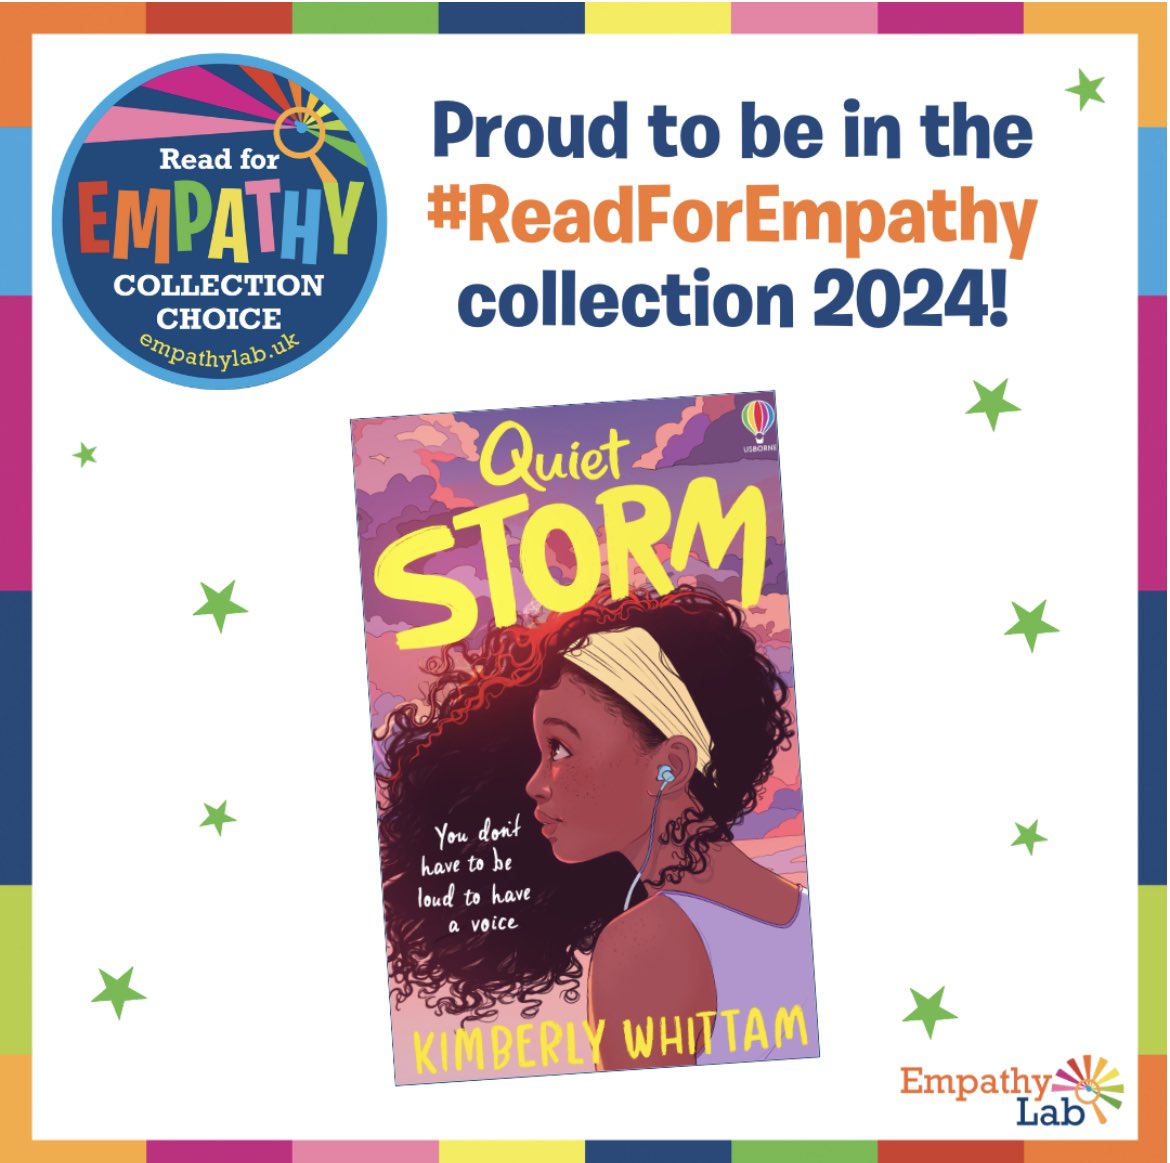 So happy my book Quiet Storm is in the 2024 #ReadForEmpathy collection from @EmpathyLabUK. If ever we needed more empathy, it’s now! Download the 2024 #ReadForEmpathy Guides here  empathylab.uk/RFE-2024